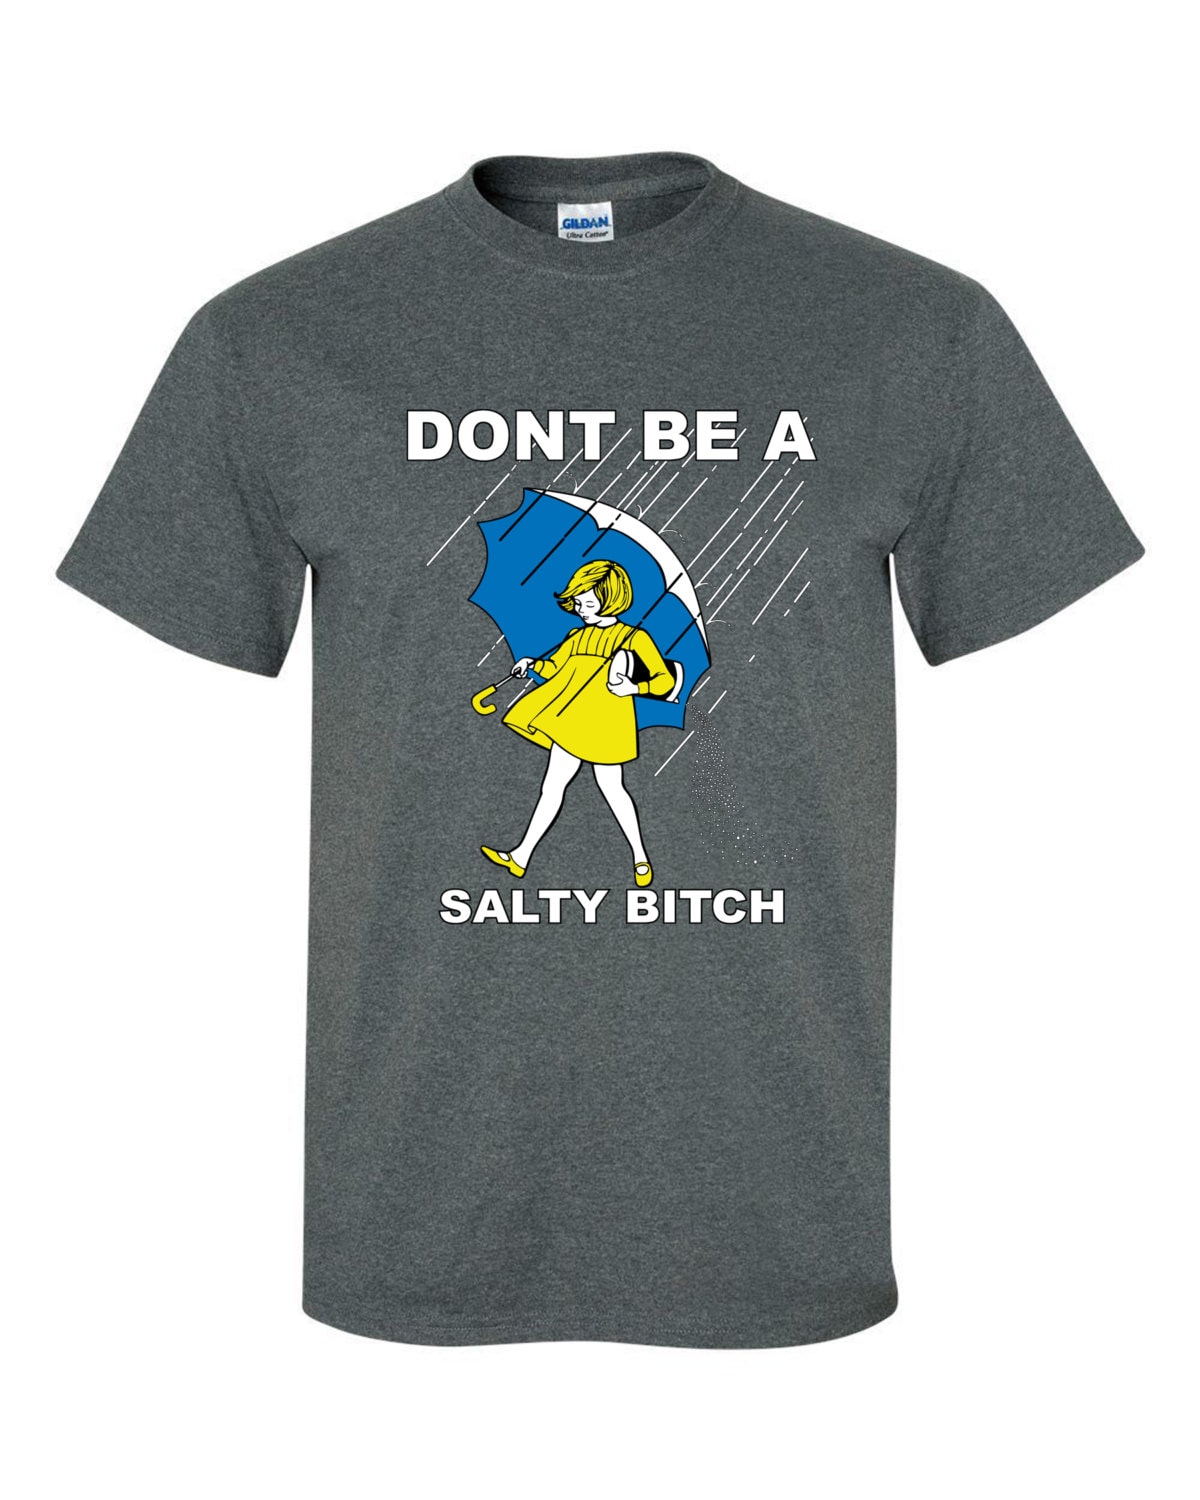 Dont Be a Salty Bitch T-Shirt Funny Quote by jweleryHouseCreation